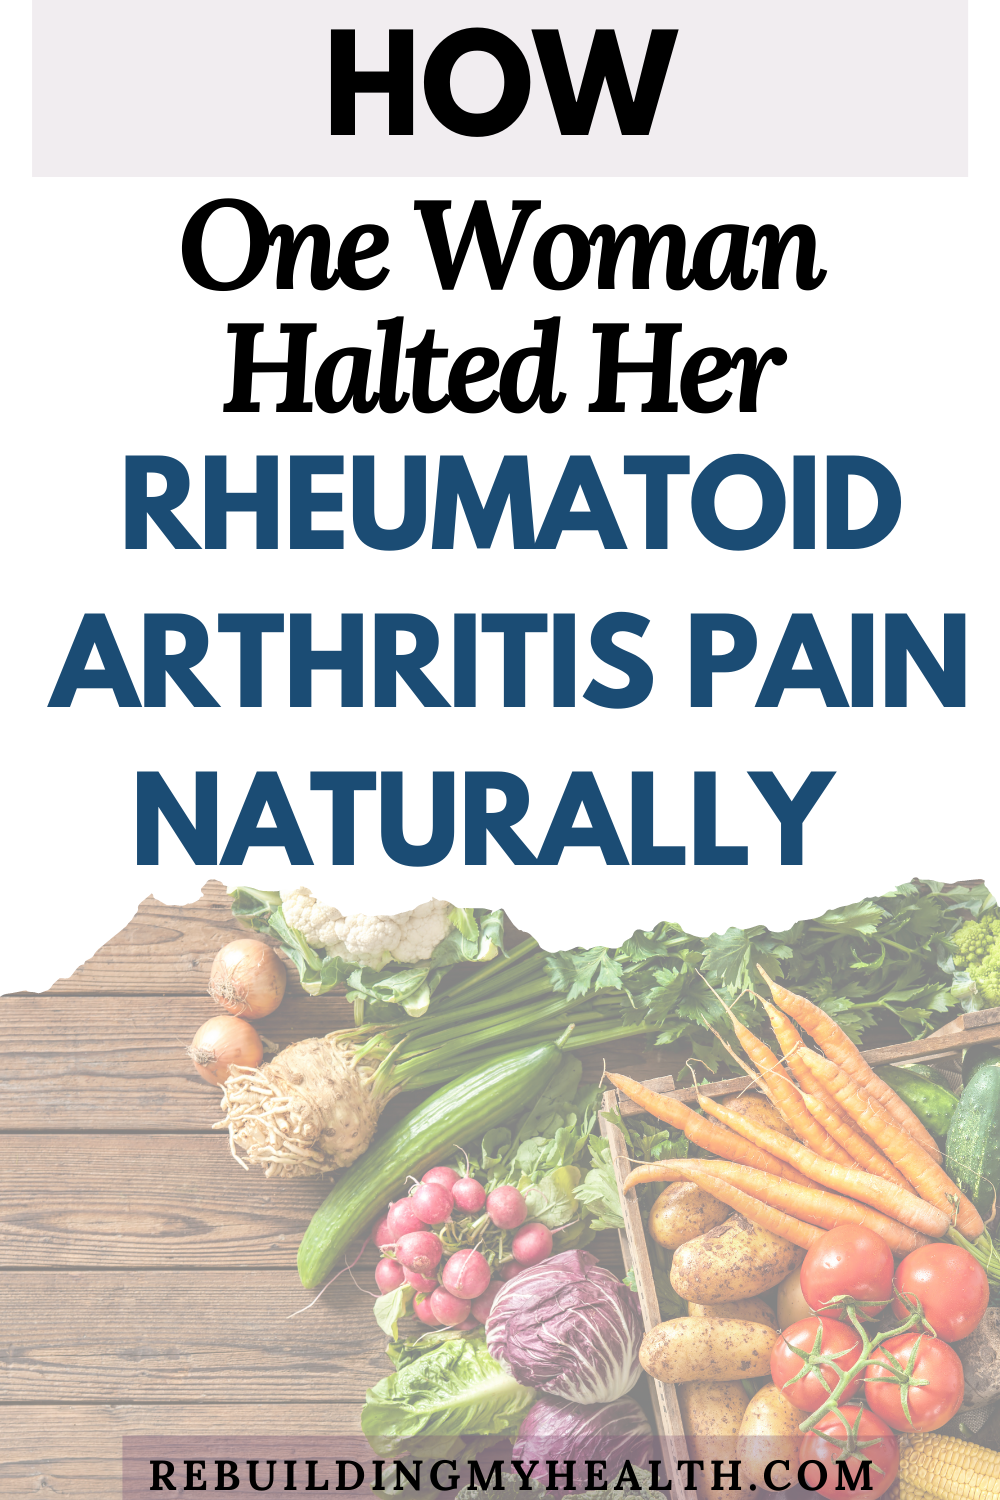 When Jane experienced severe joint pain, she chose to treat rheumatoid arthritis naturally with diet, gut healing and mind-body practices.